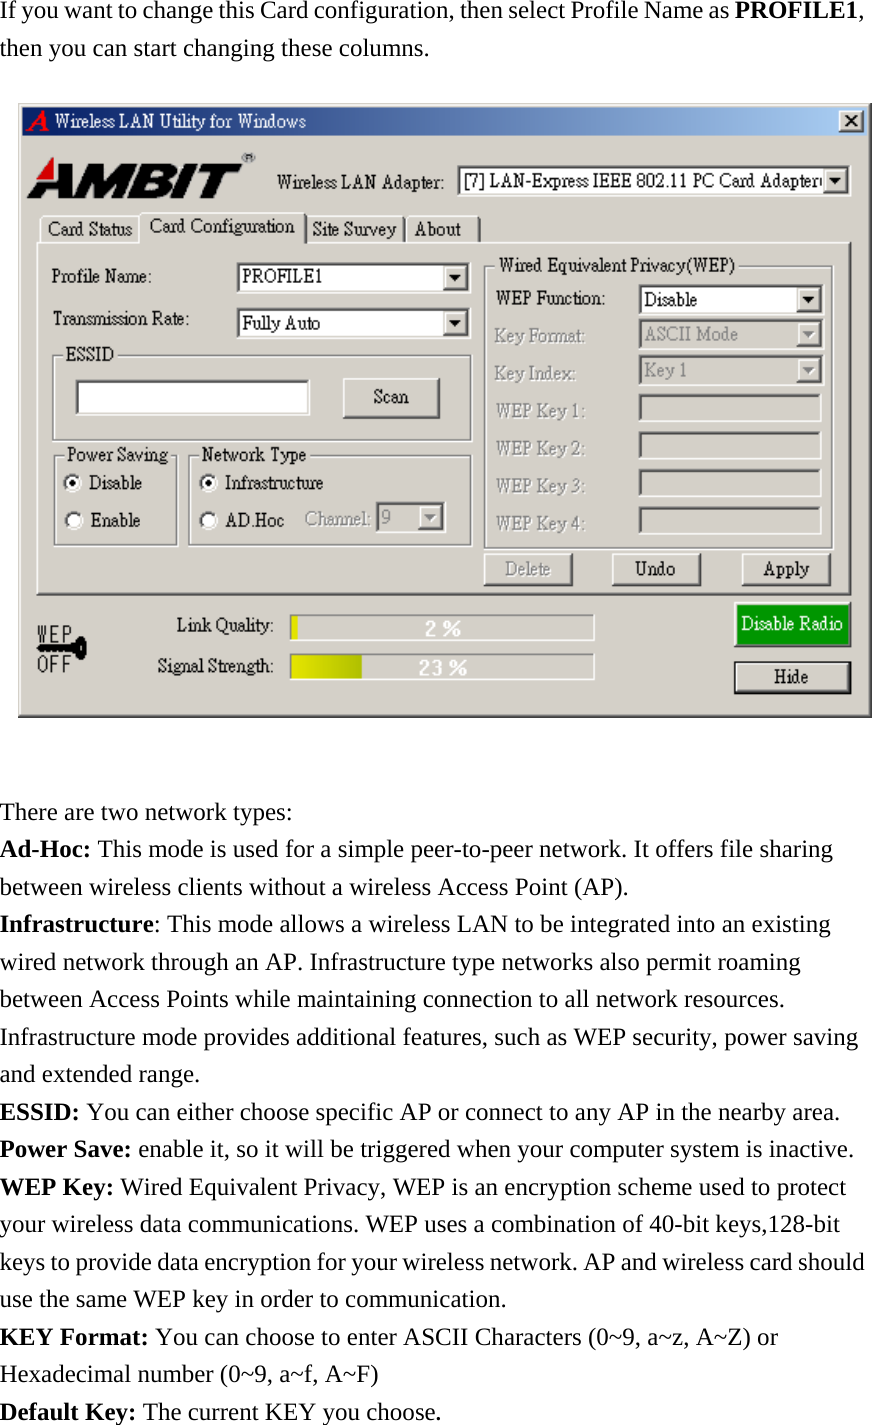 If you want to change this Card configuration, then select Profile Name as PROFILE1, then you can start changing these columns.    There are two network types:  Ad-Hoc: This mode is used for a simple peer-to-peer network. It offers file sharing between wireless clients without a wireless Access Point (AP). Infrastructure: This mode allows a wireless LAN to be integrated into an existing wired network through an AP. Infrastructure type networks also permit roaming between Access Points while maintaining connection to all network resources. Infrastructure mode provides additional features, such as WEP security, power saving and extended range. ESSID: You can either choose specific AP or connect to any AP in the nearby area. Power Save: enable it, so it will be triggered when your computer system is inactive. WEP Key: Wired Equivalent Privacy, WEP is an encryption scheme used to protect your wireless data communications. WEP uses a combination of 40-bit keys,128-bit keys to provide data encryption for your wireless network. AP and wireless card should use the same WEP key in order to communication.  KEY Format: You can choose to enter ASCII Characters (0~9, a~z, A~Z) or Hexadecimal number (0~9, a~f, A~F) Default Key: The current KEY you choose. 